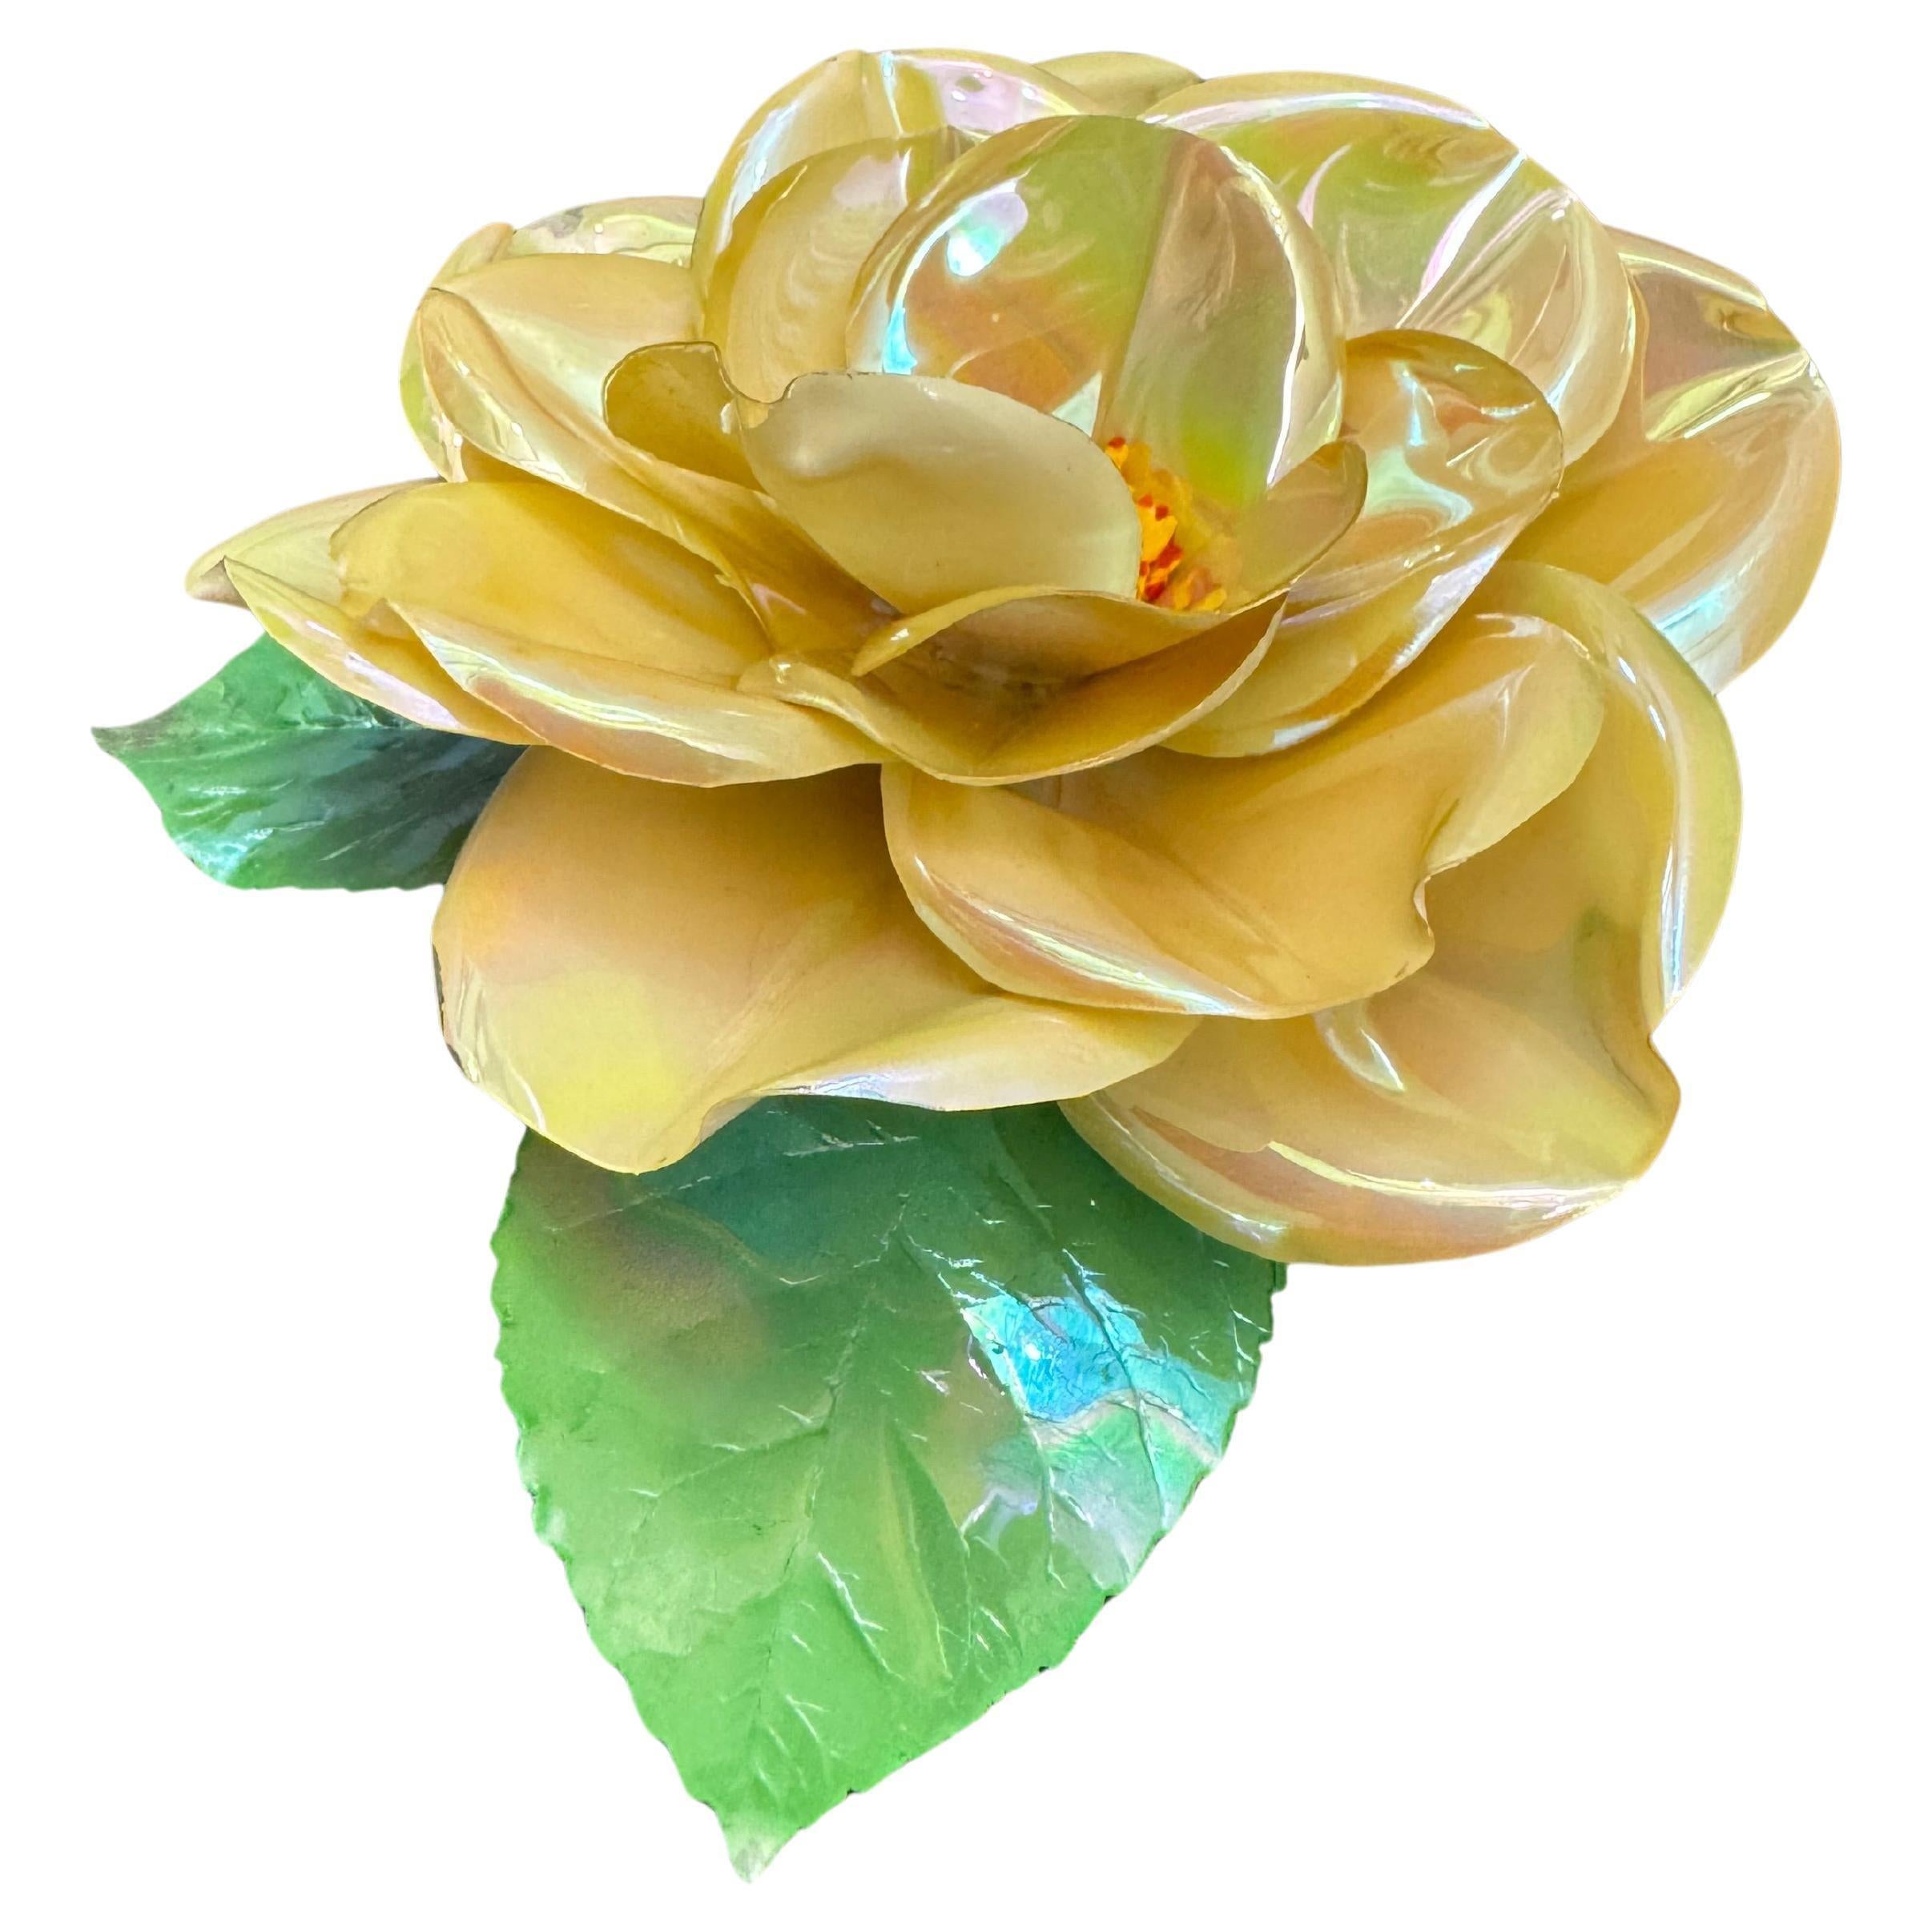 This vintage CHANEL massive camellia brooch is crafted of coated vinyl petals in iridescent cream color. Stamped CHANEL made in France. Measures approximately 5 cm in diameter. Comes with box. 

Condition: Good vintage condition with minor peelings